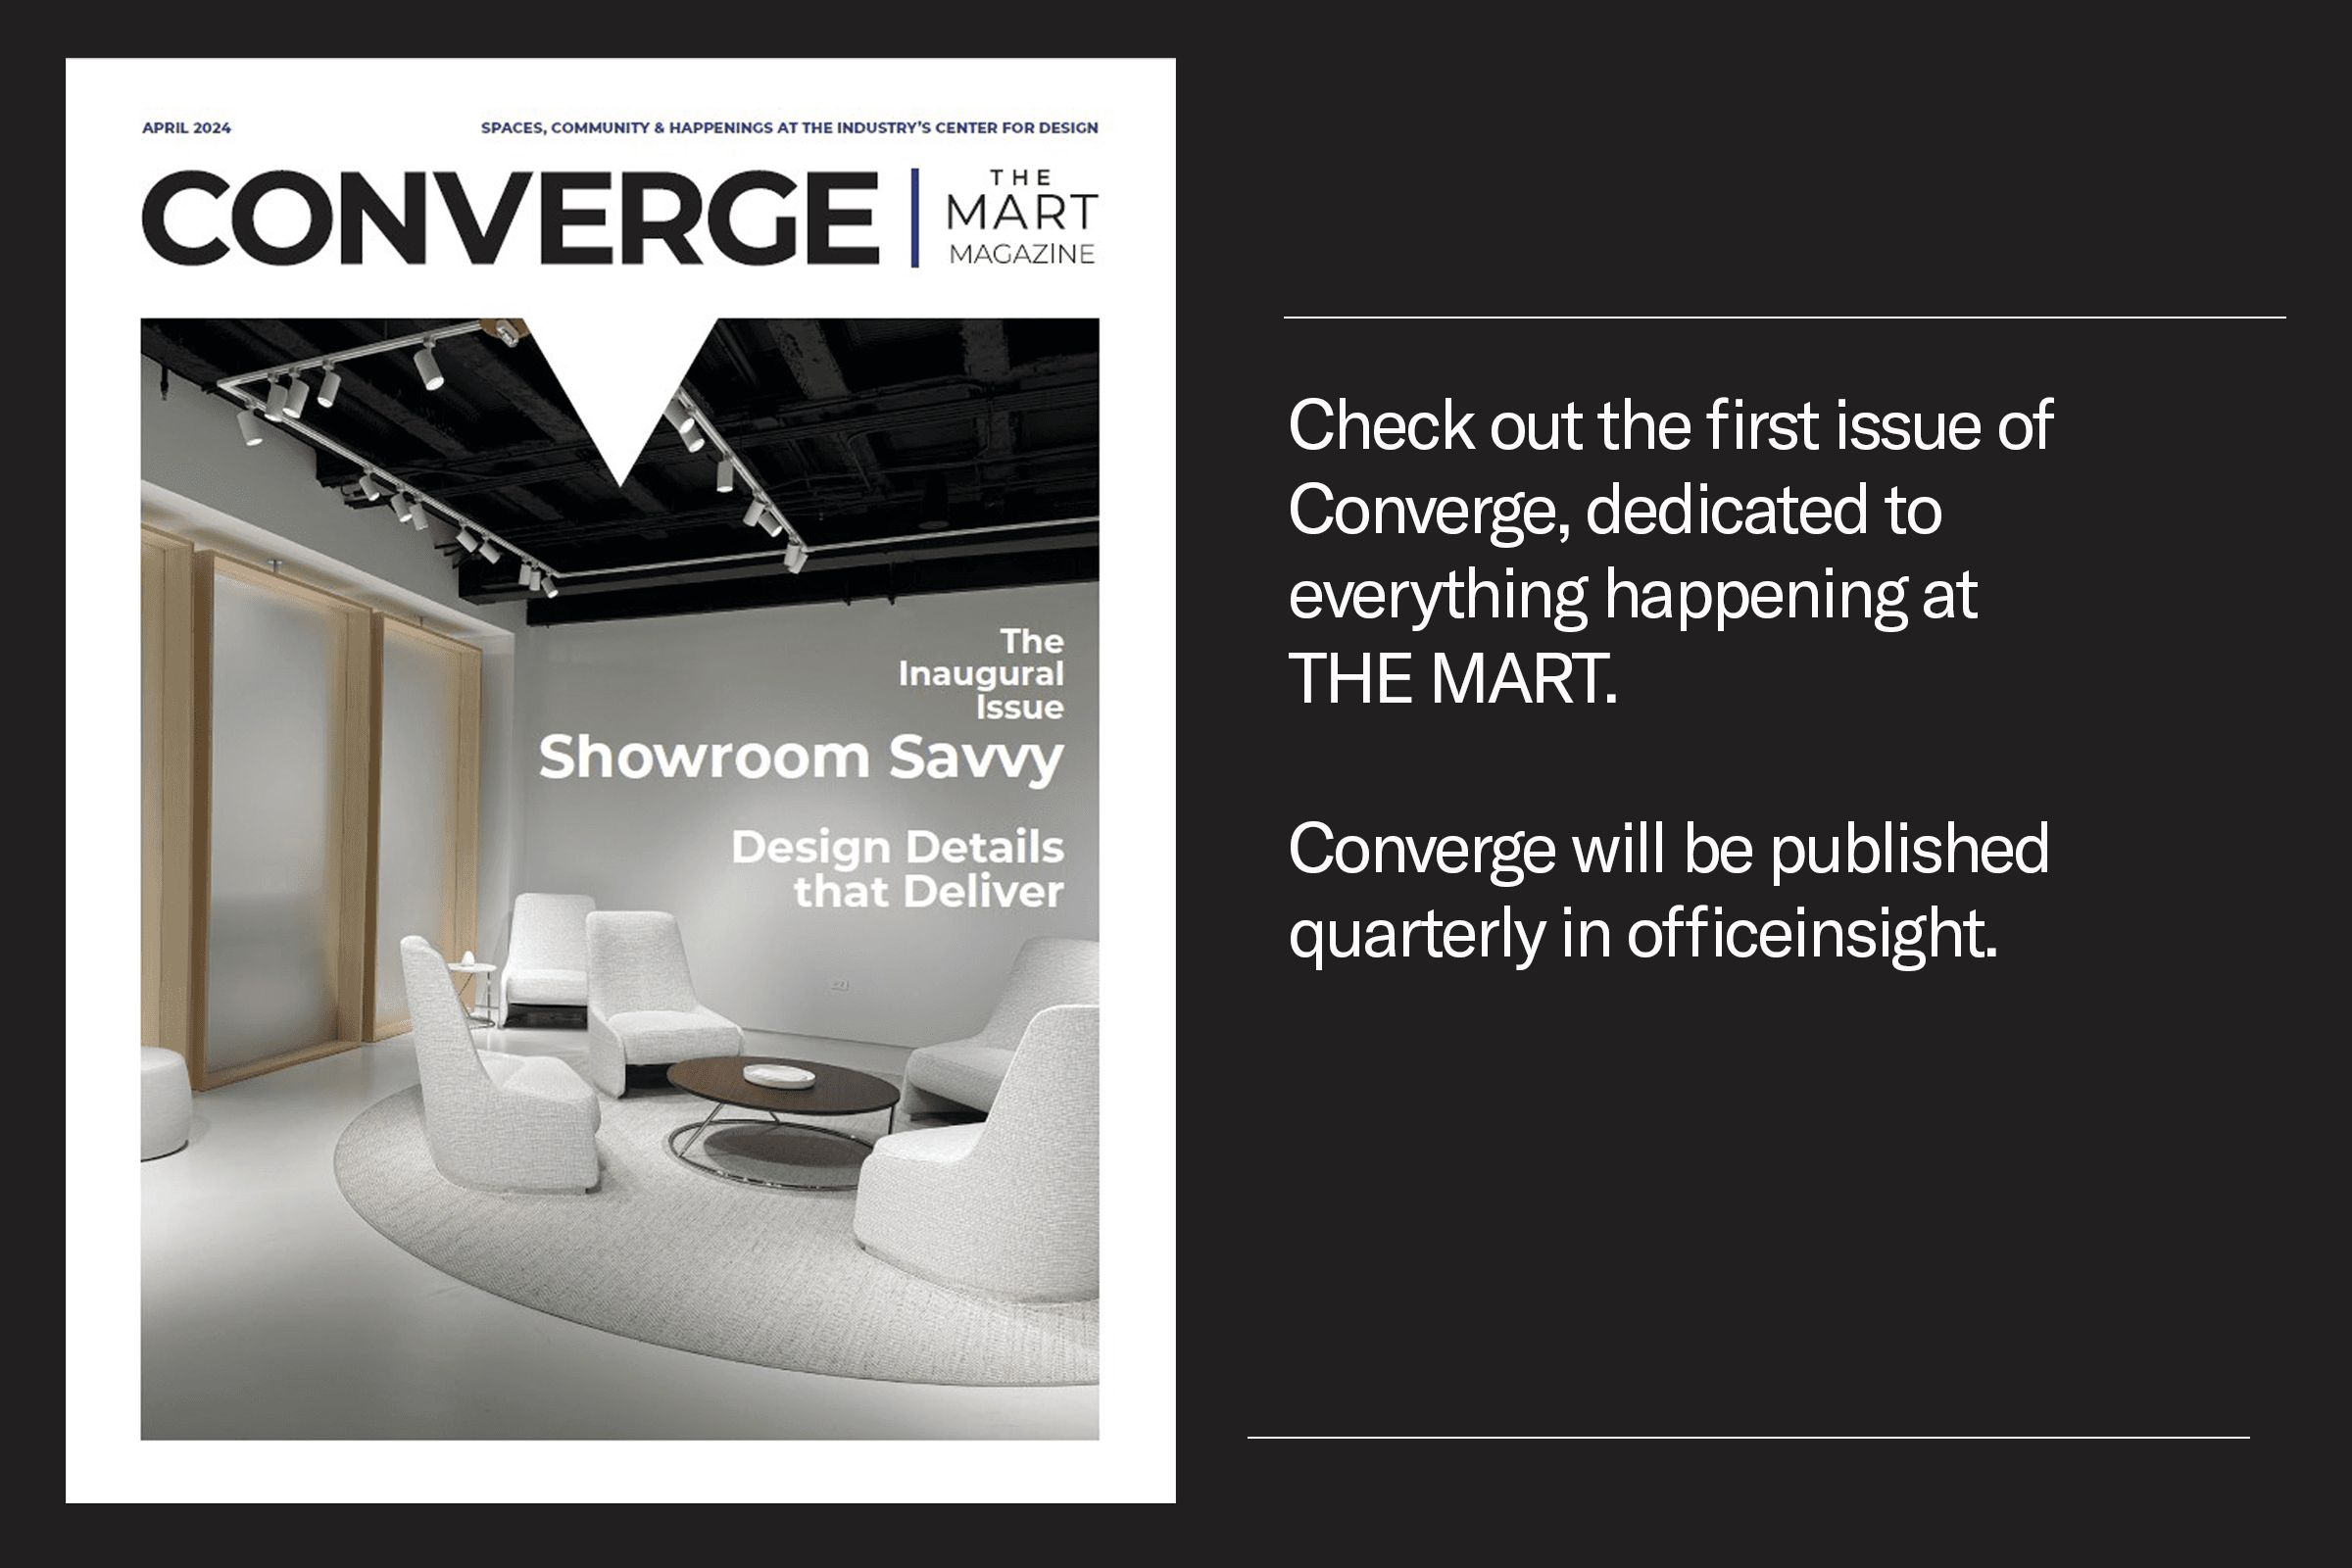 April 2024 - Spaces, Community & Happenings at the Industry's Center for Design - Converge | THE MART MAGAZINE - The Inaugural Issue - Showroom Savvy